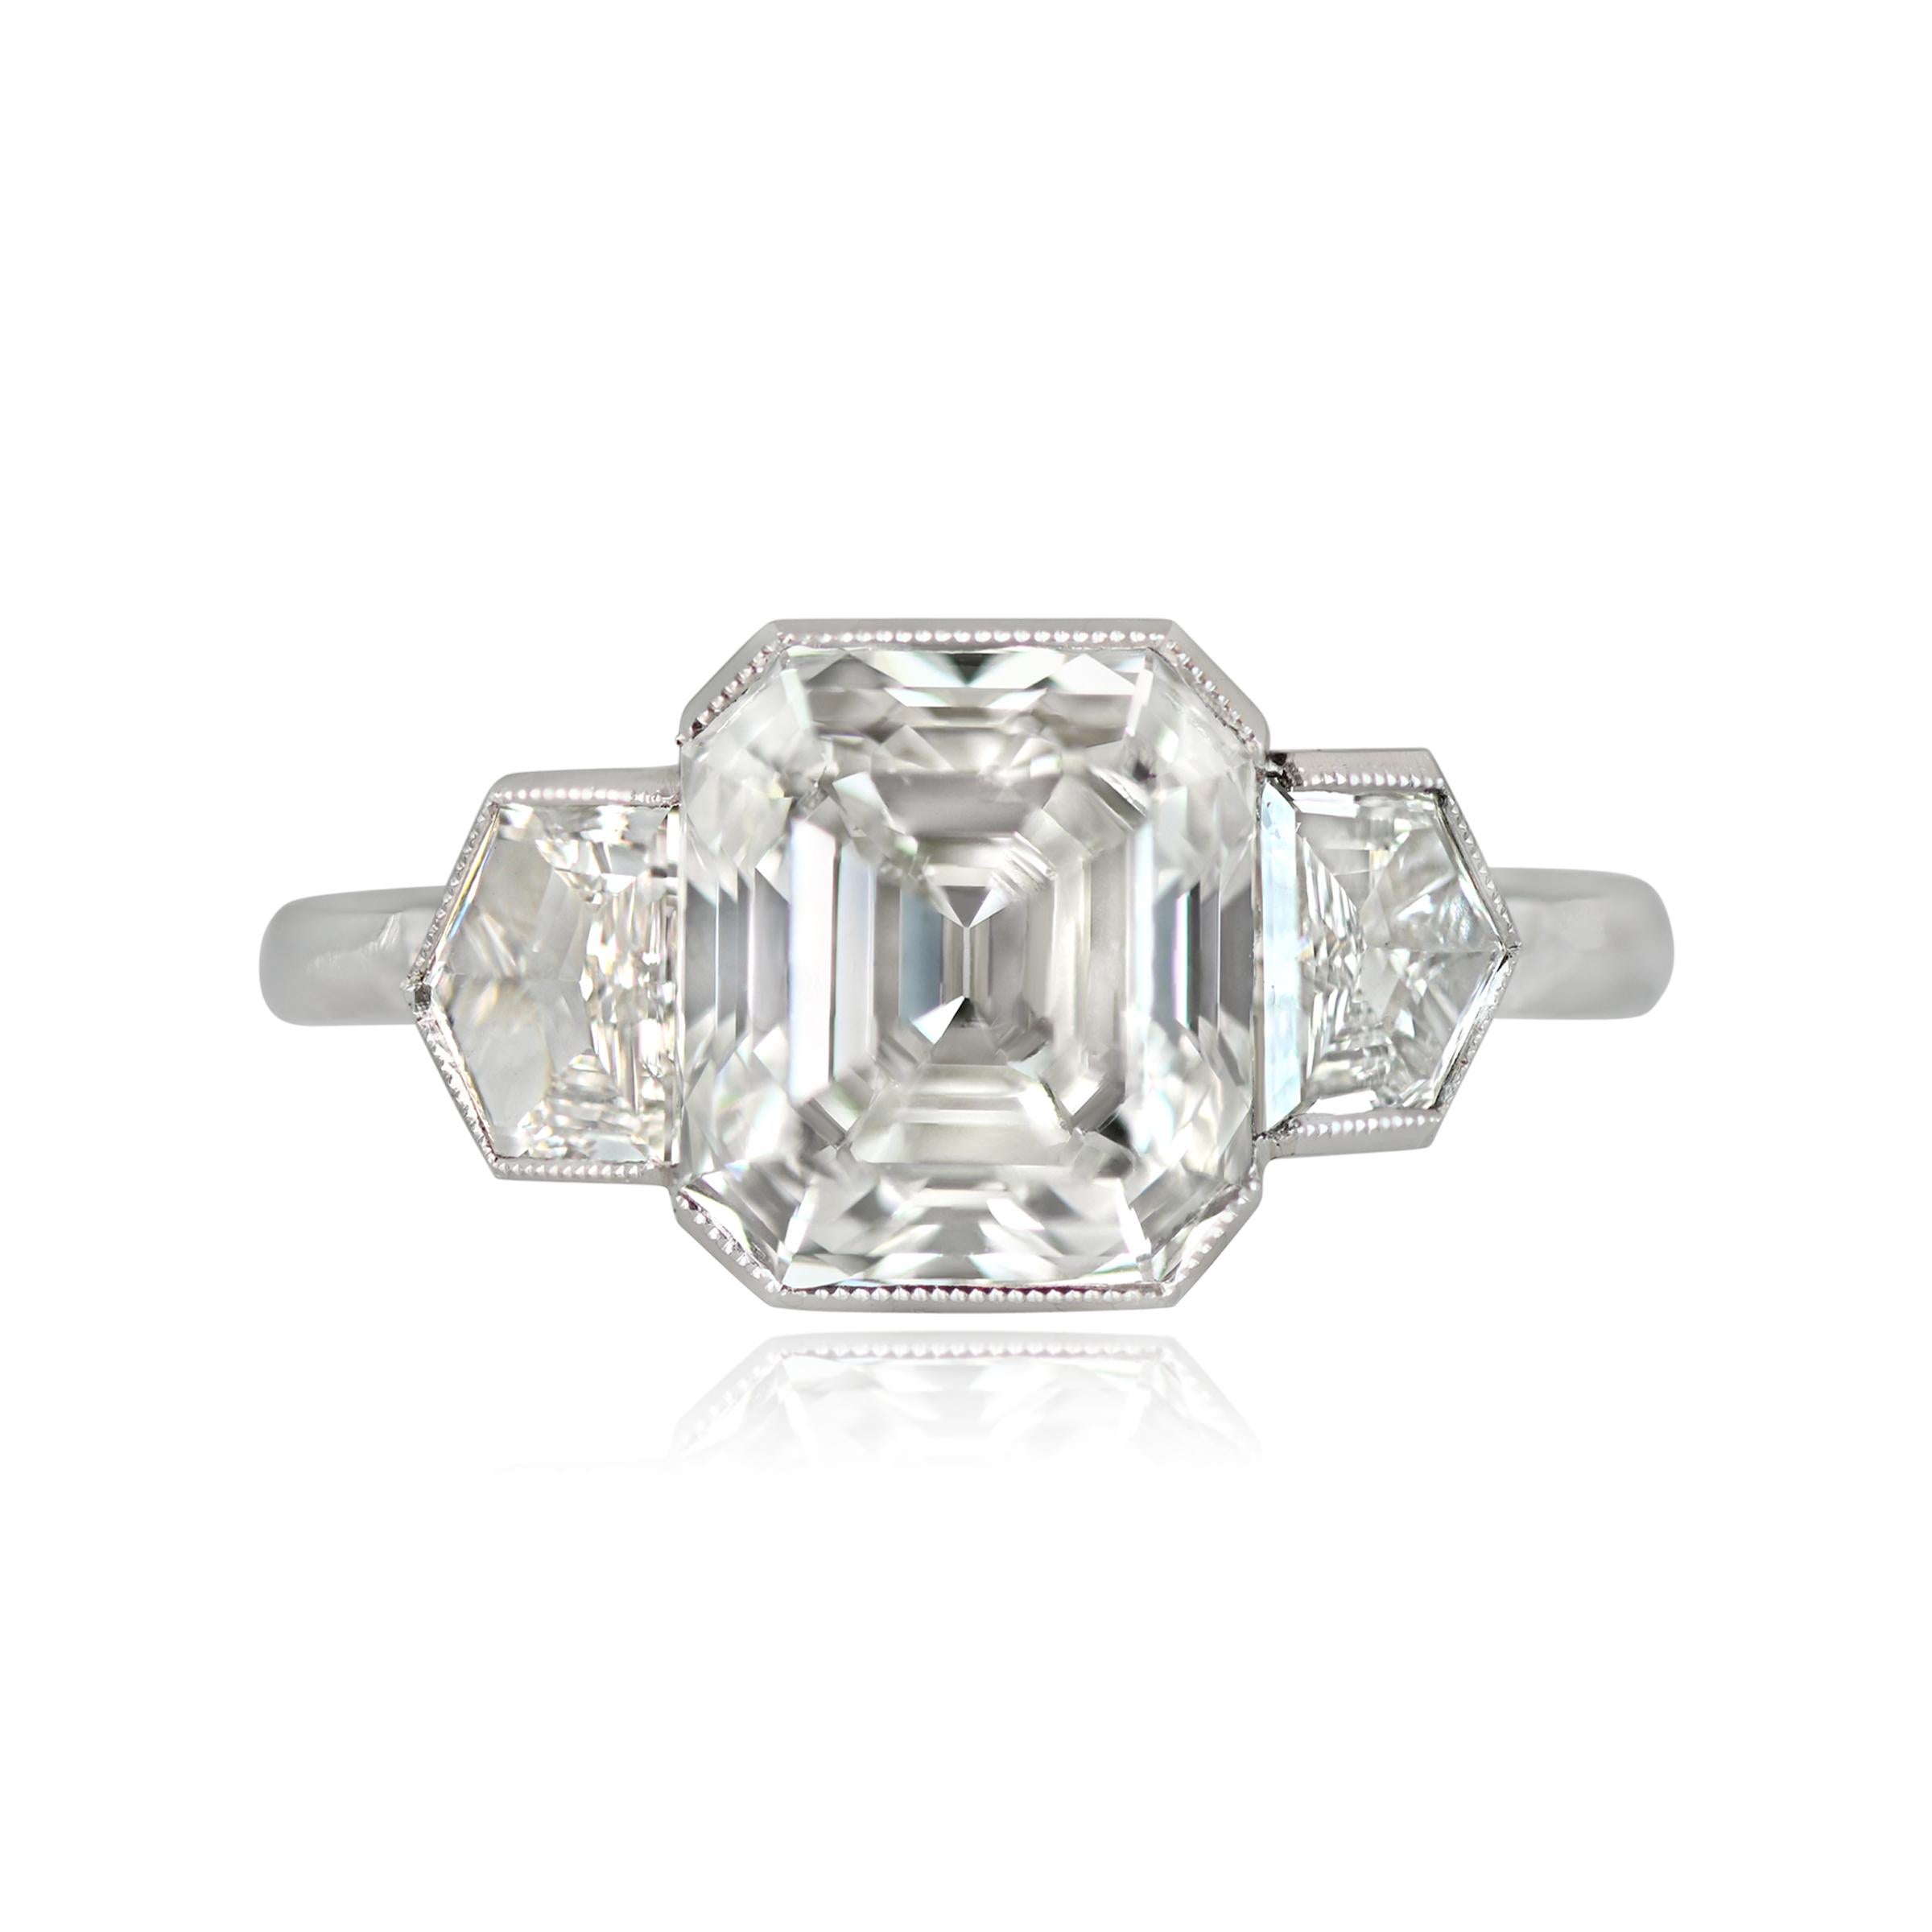 This is a stunning engagement ring showcases a 3.14-carat emerald-cut diamond (I color, VS2 clarity) in a half-bezel setting, flanked by two bullet-shaped diamonds weighing a total of 0.80 carats. Handcrafted in platinum.

Ring Size: 6.5 US,